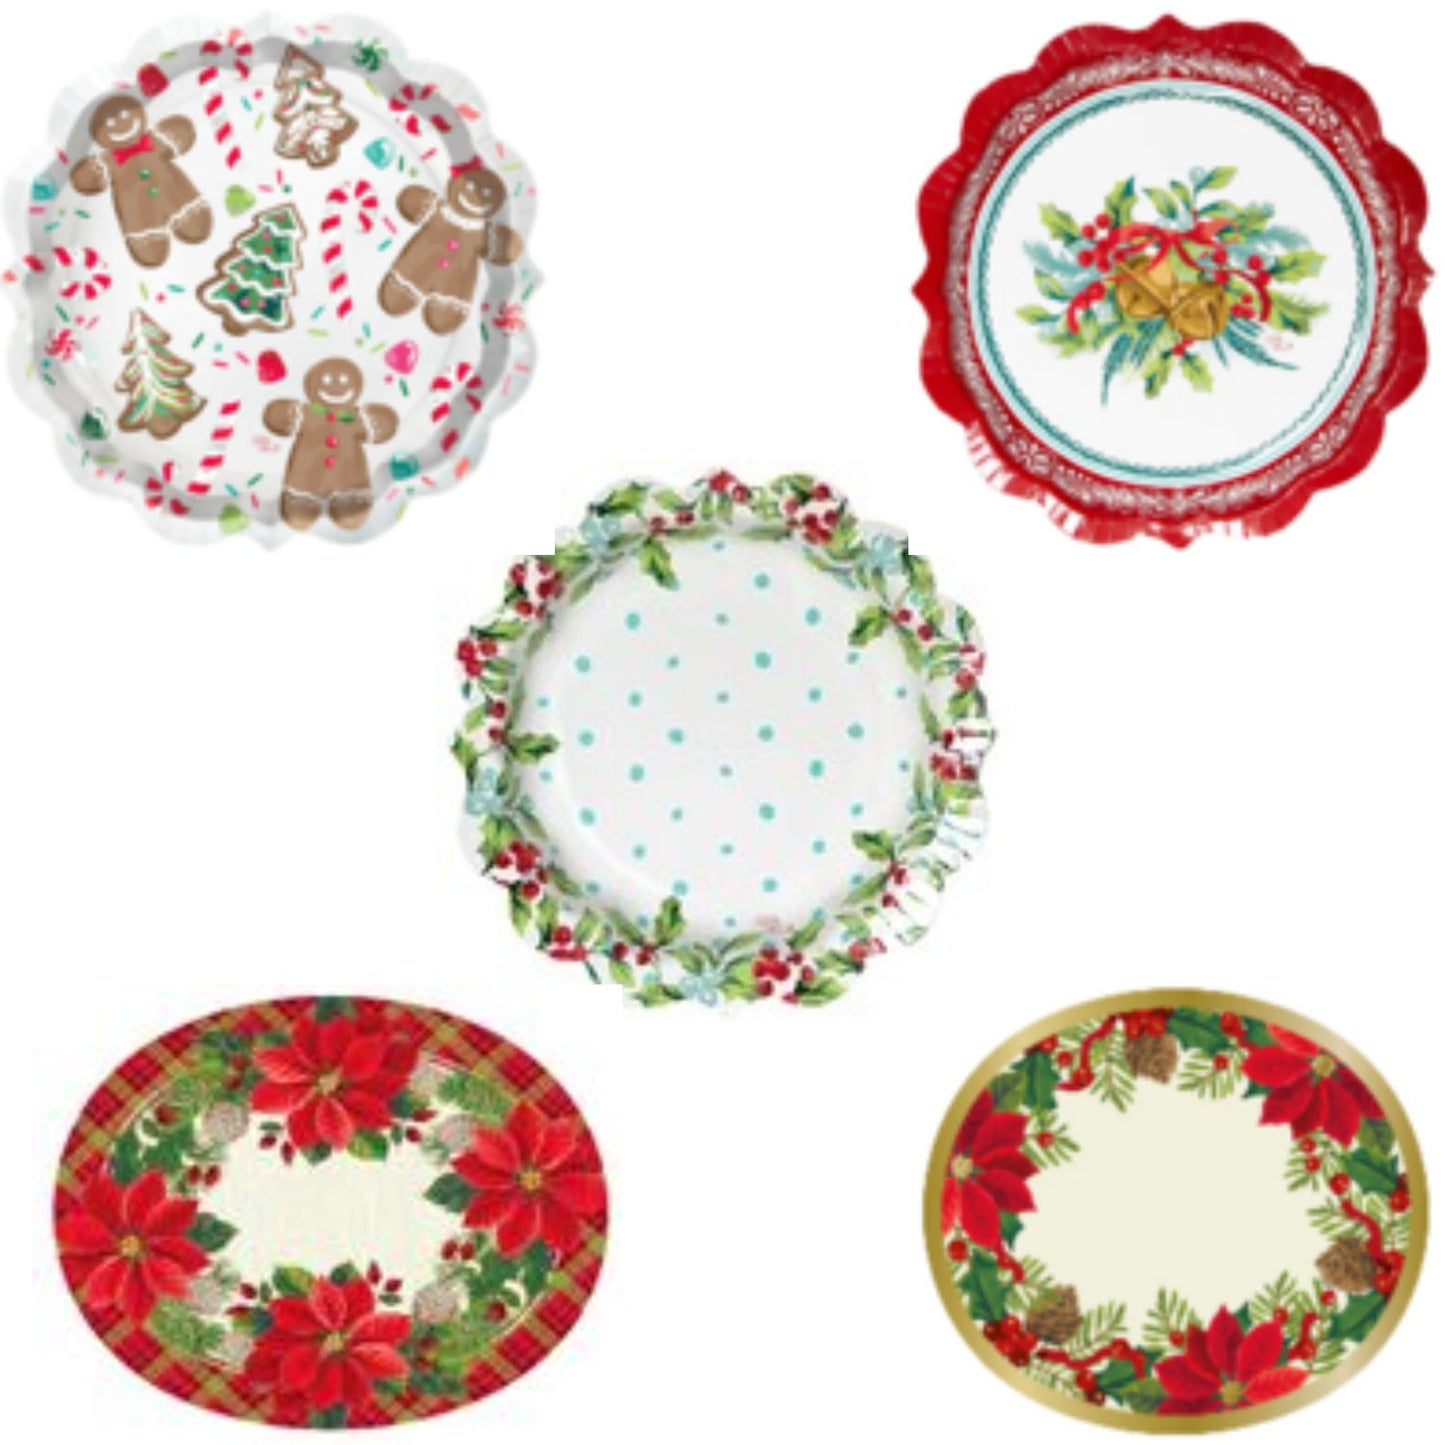 Bid on 1000 PACKS OF CHRISTMAS PLATES, ASSORTMENT OF STYLES, RRP £10,000- Buy &amp; Sell on Auction with EAMA Group